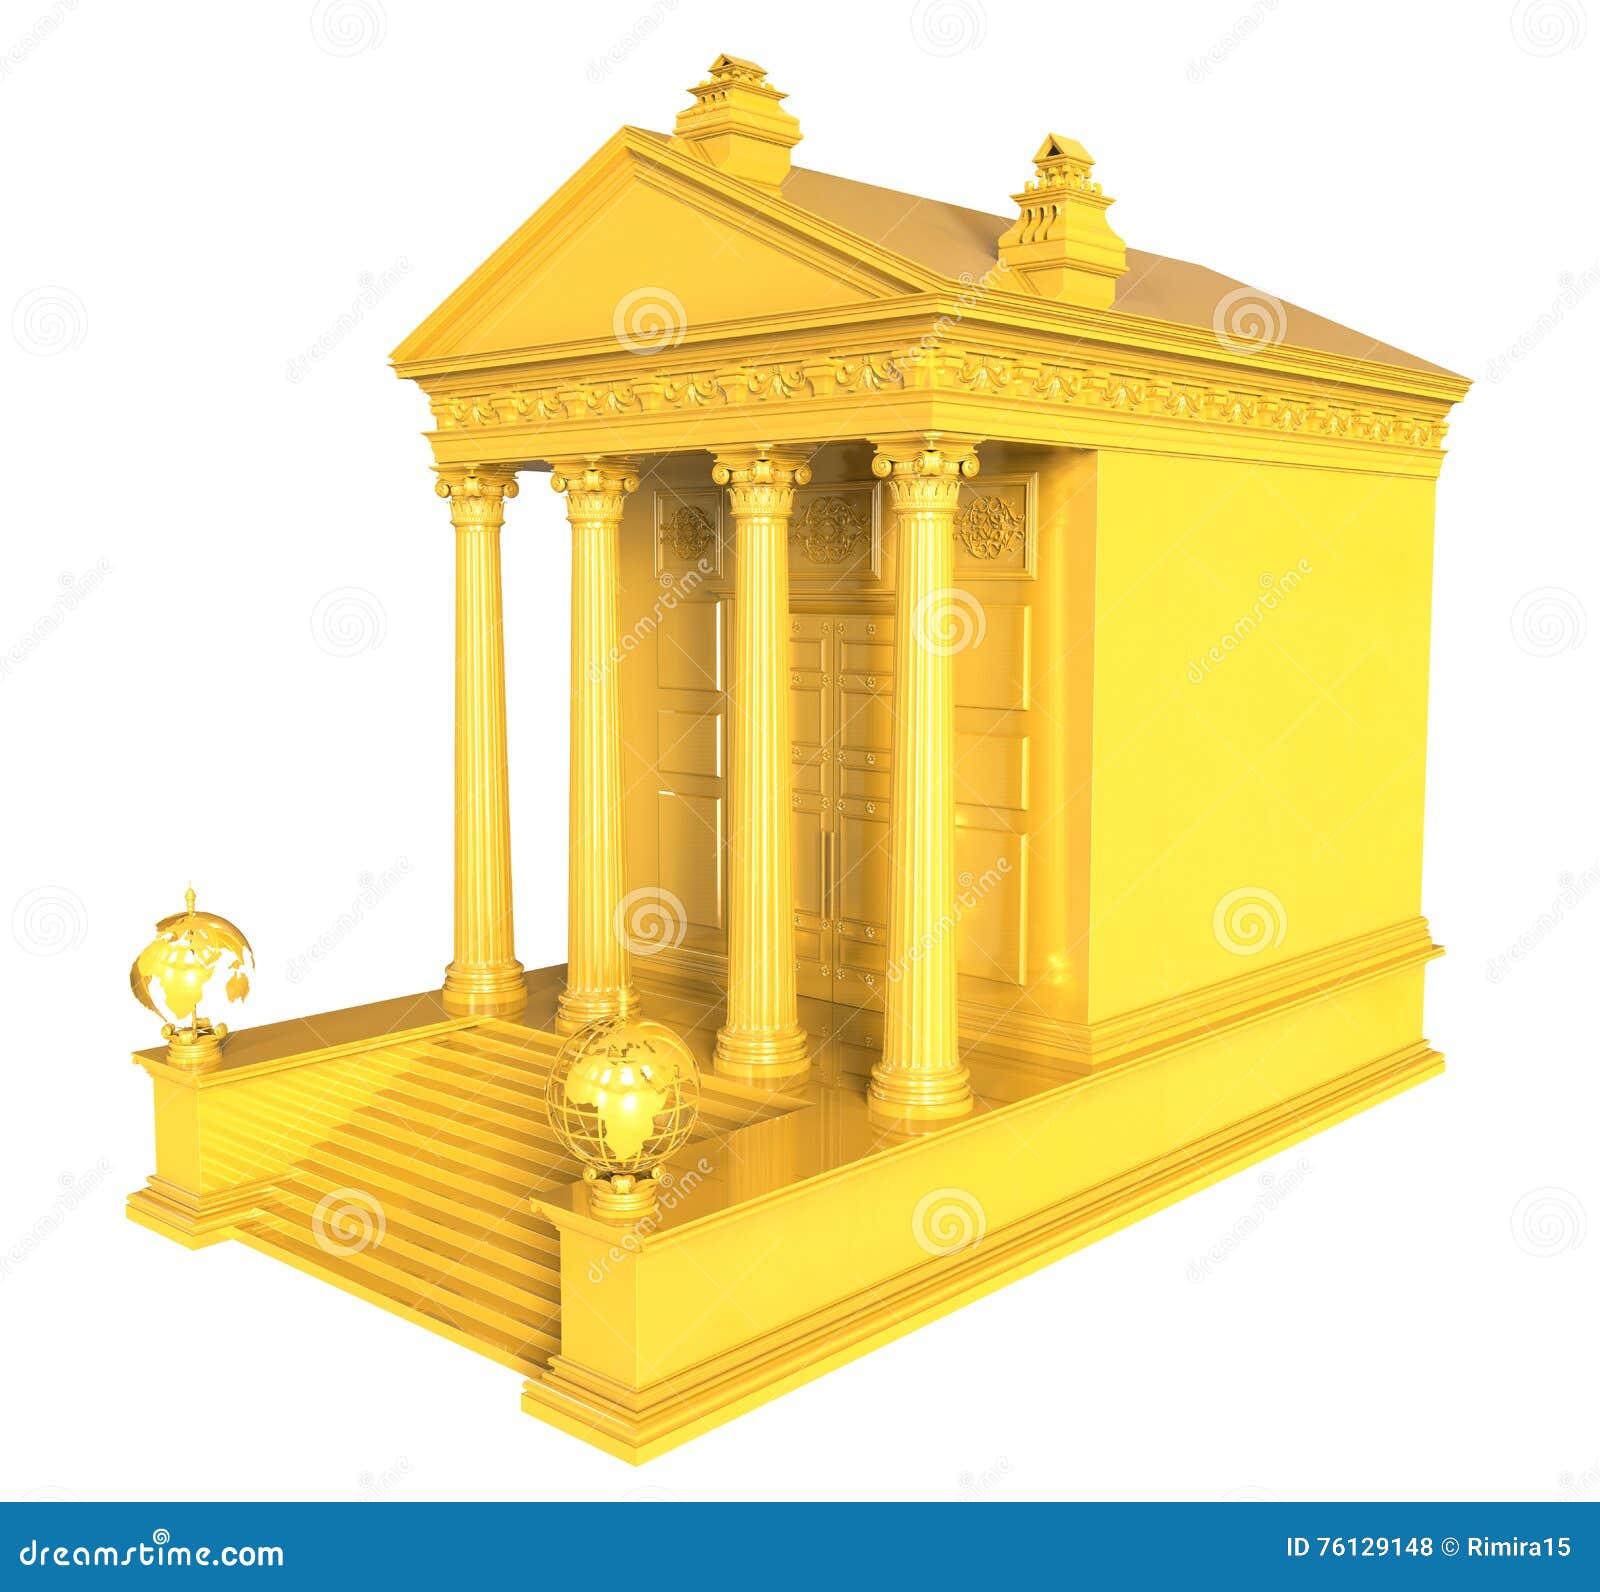 gold financial institution